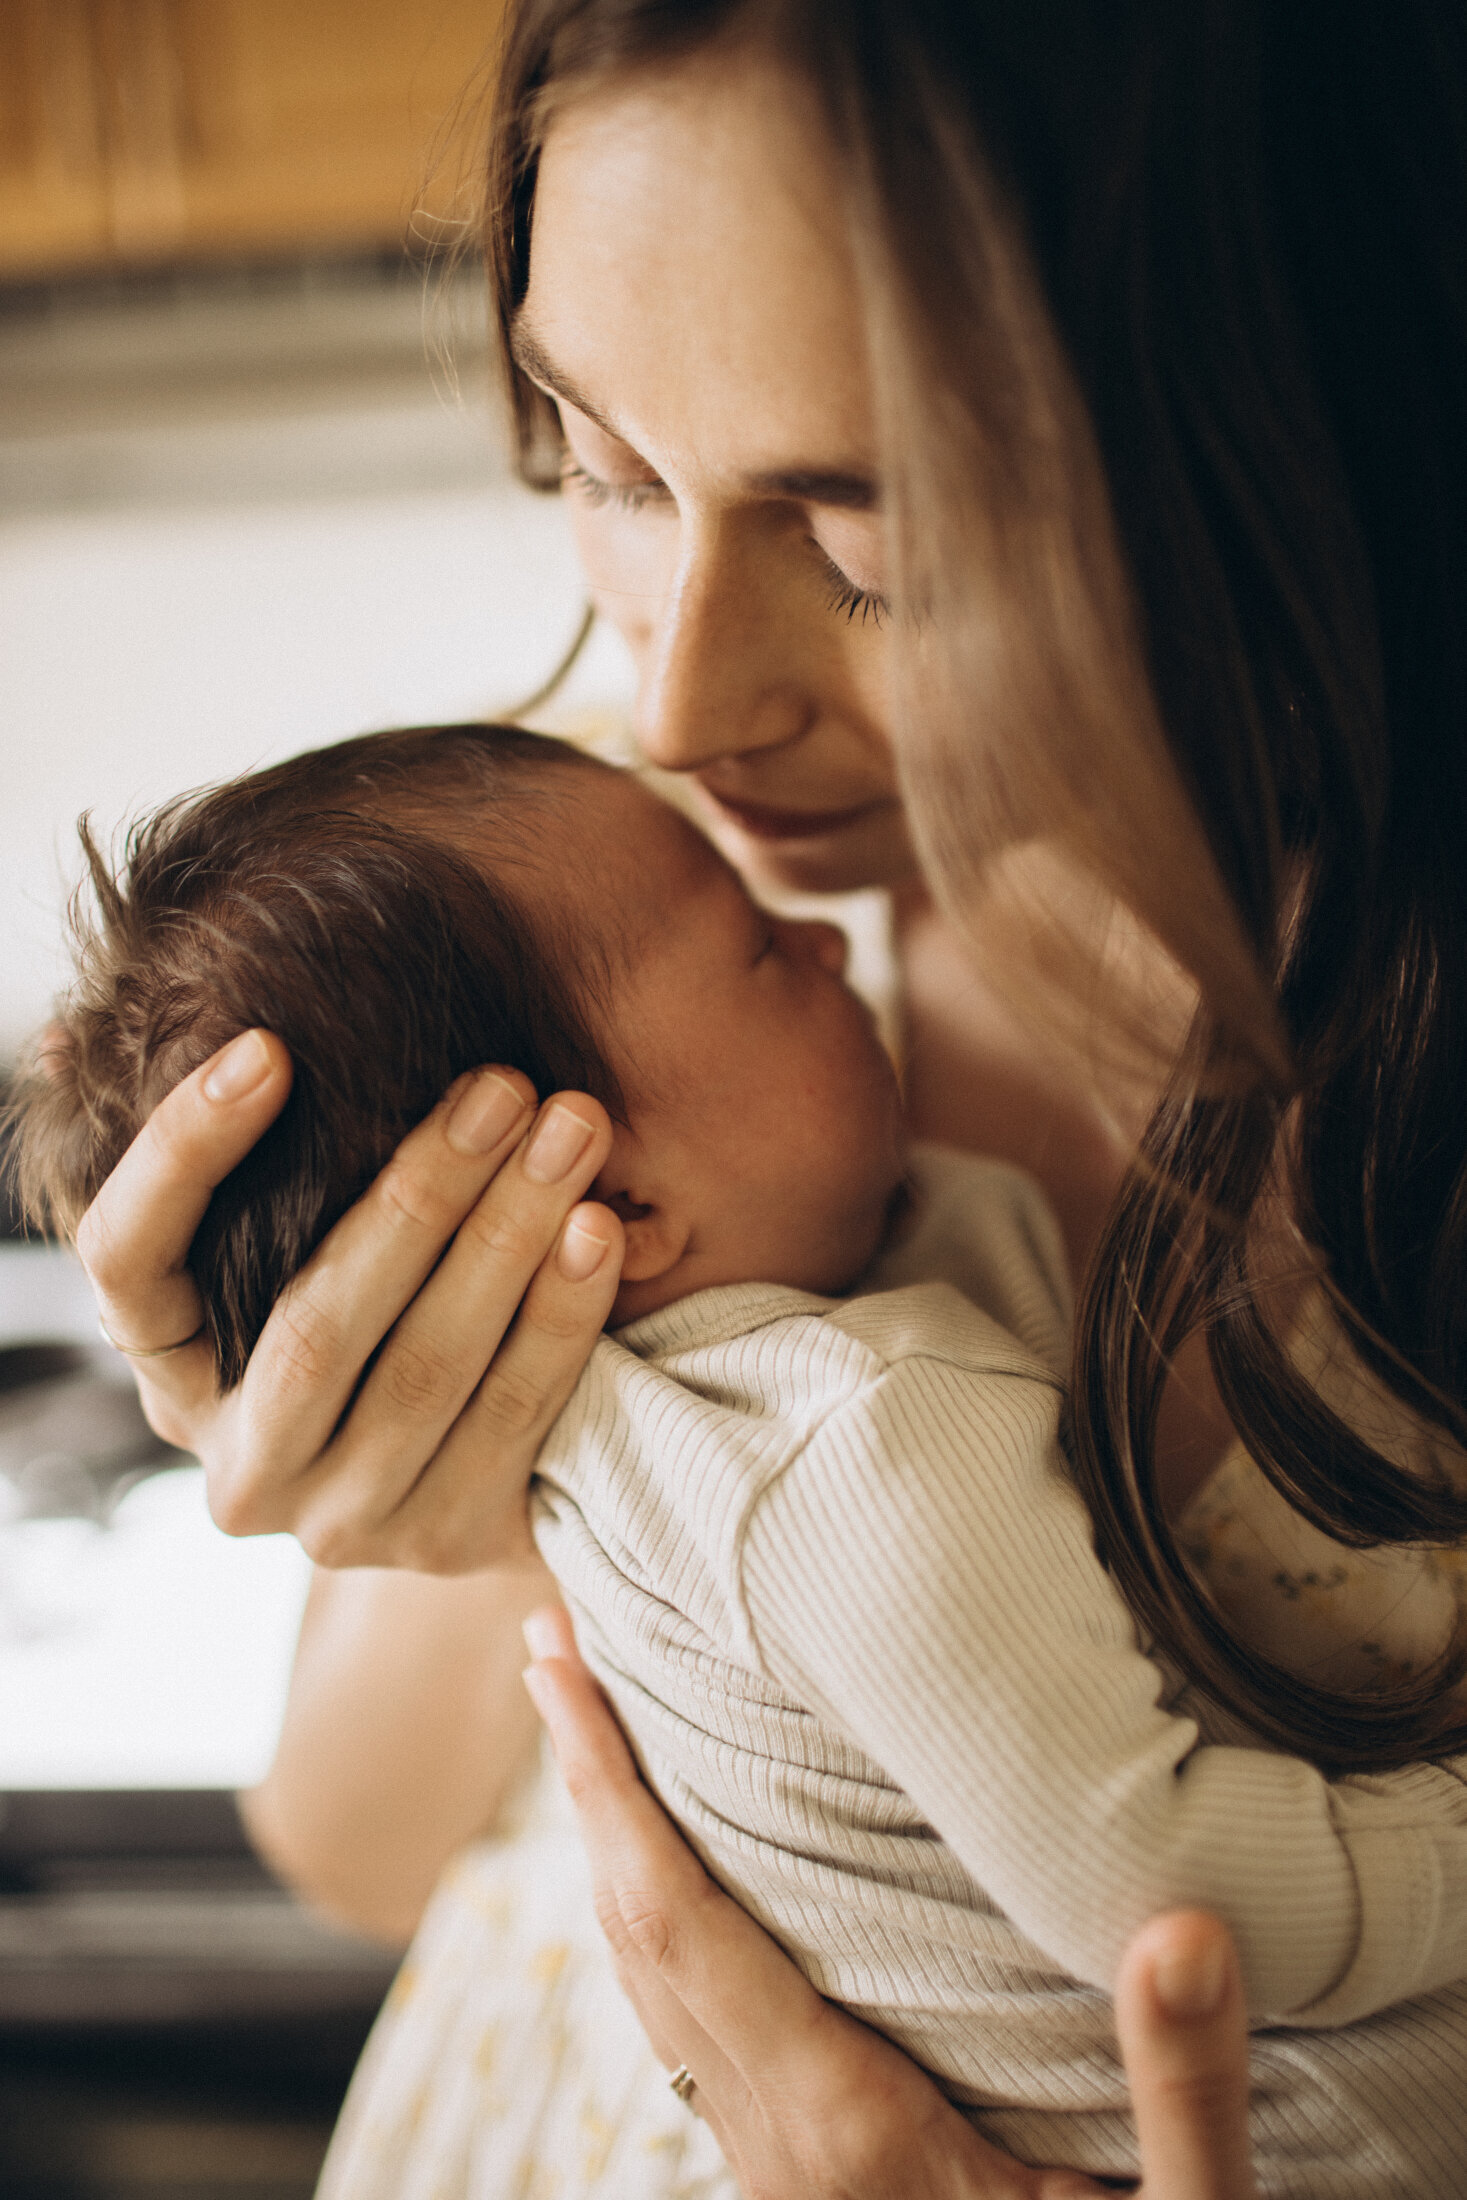 A tender moment as a mother gently holds her newborn baby, softly cradling the infant's head while looking at them with adoration and love. the setting has warm natural lighting.